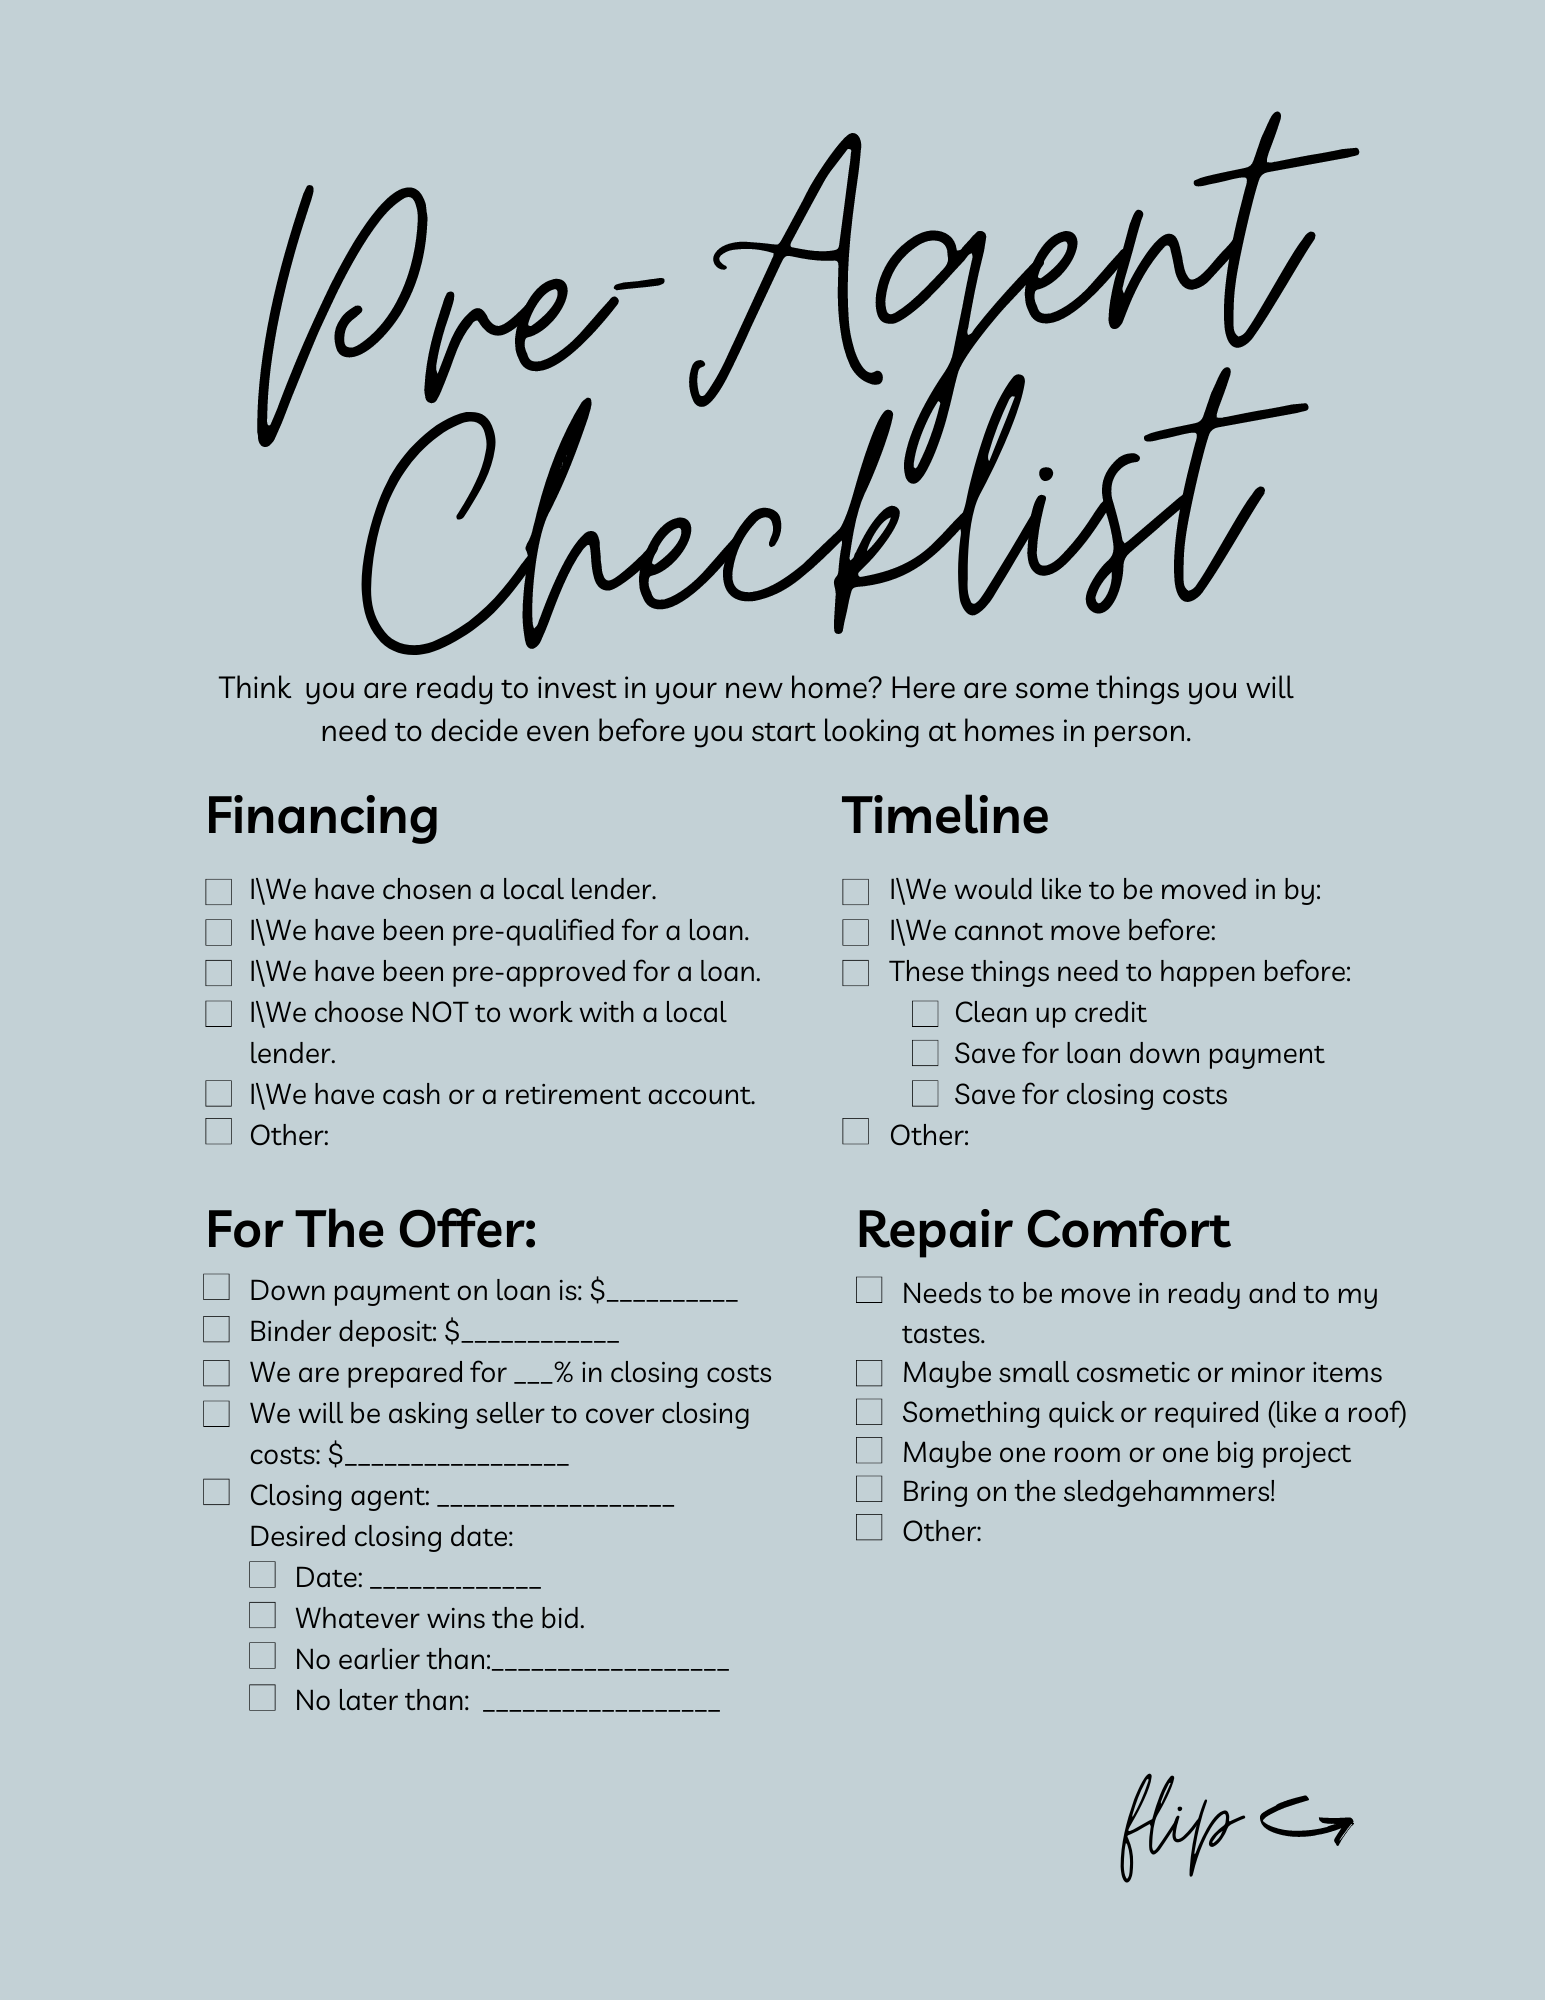 Pre agent checklist to help you decide on what to look for in a home page 1